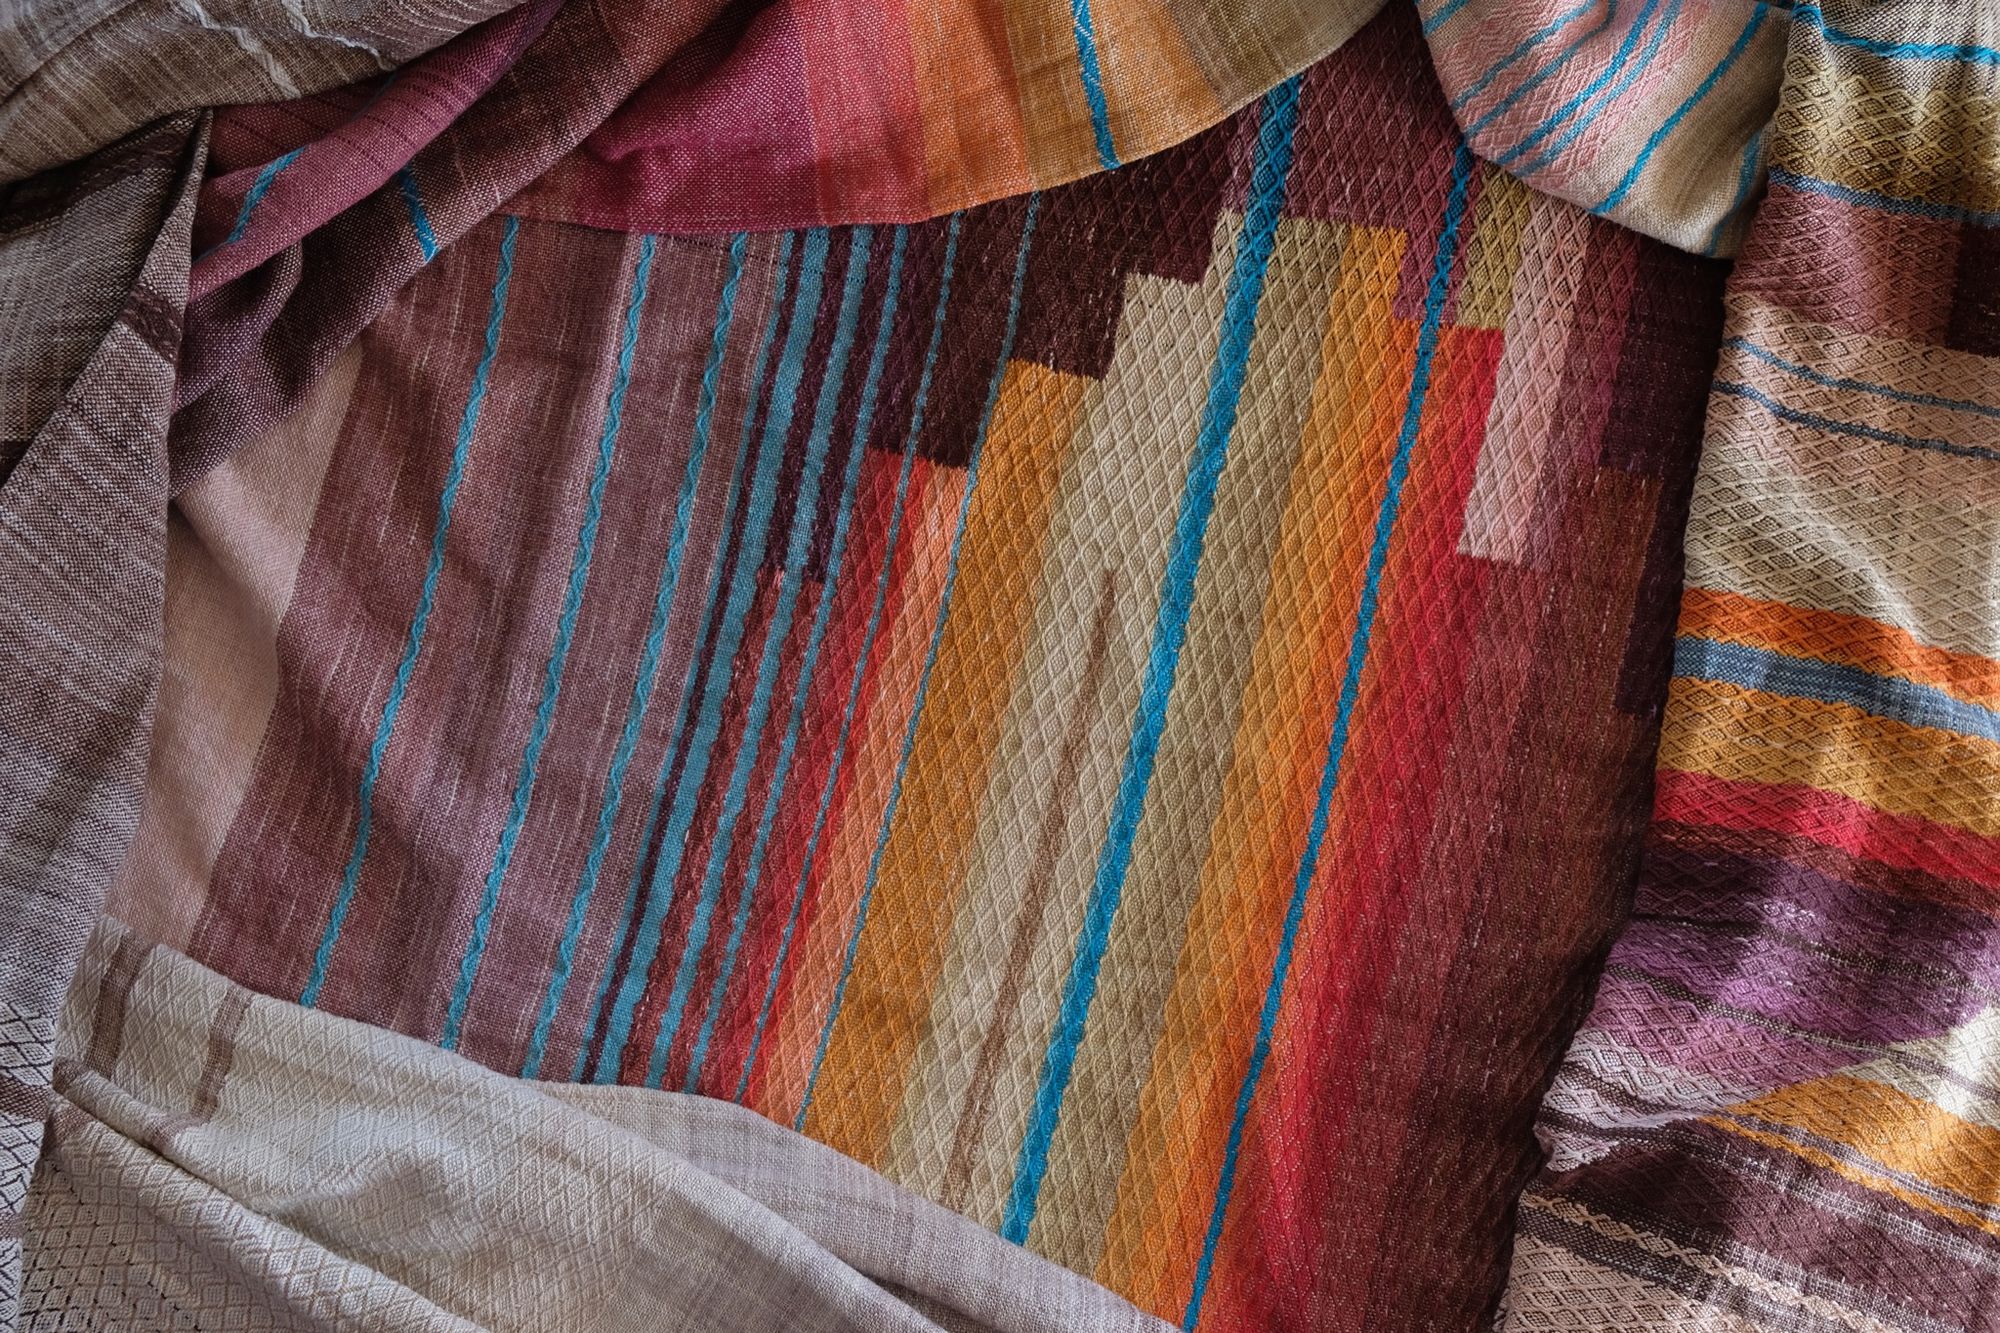 Detail of Handwoven fabric with a diamond texture pattern in natural browns, grey, purples, reds, turquoise, yellow, orange and pink.